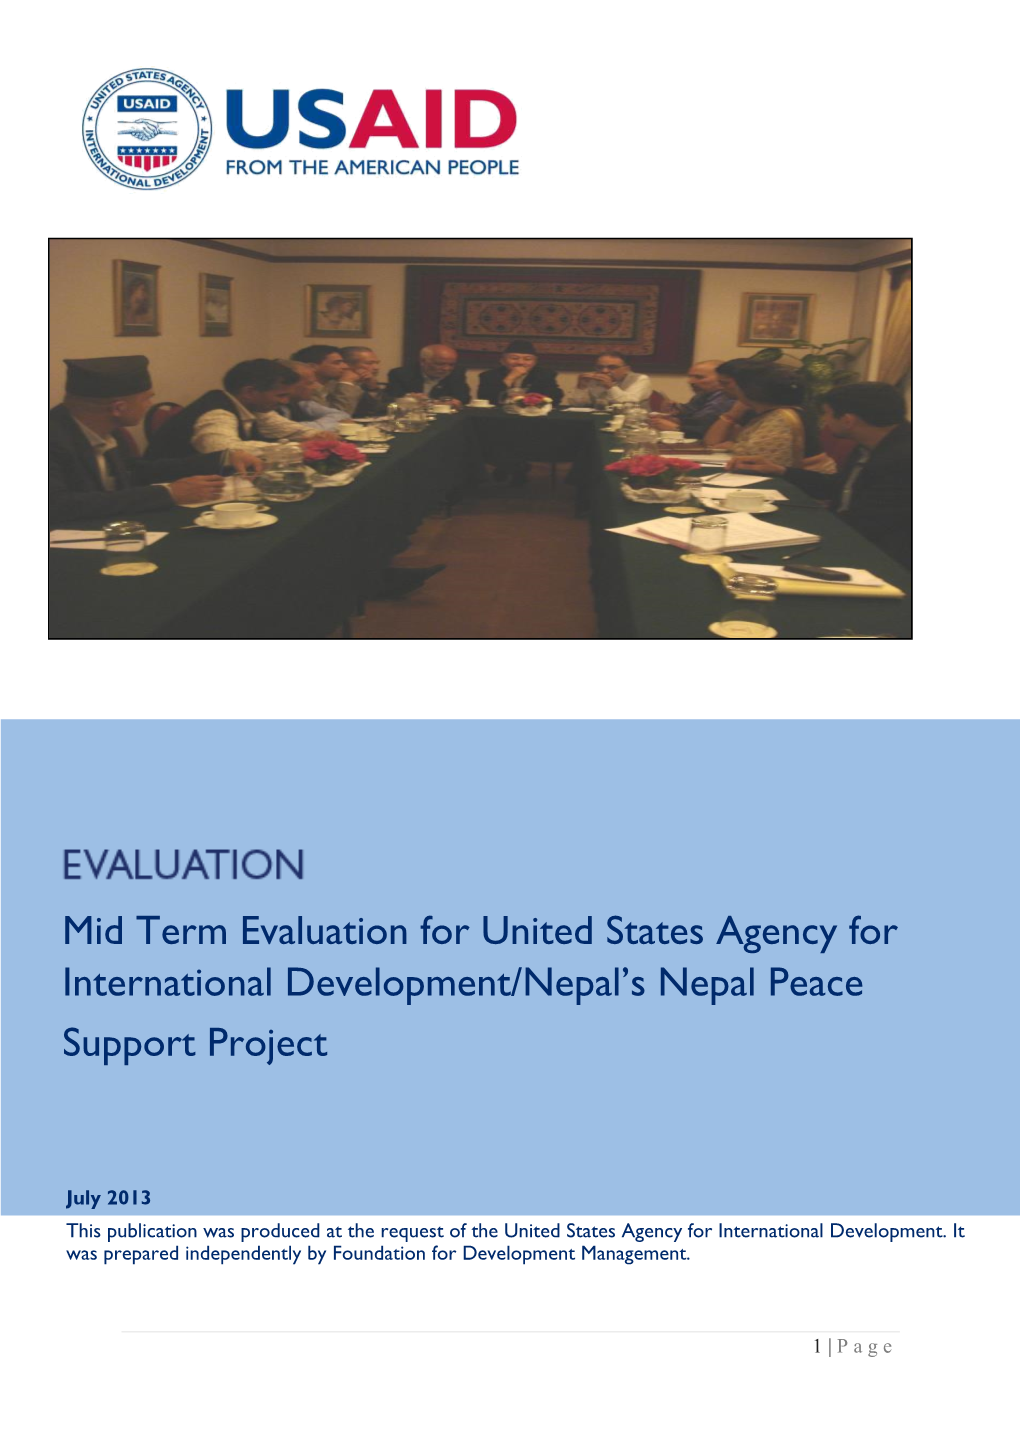 Mid Term Evaluation for United States Agency for International Development/Nepal’S Nepal Peace Support Project